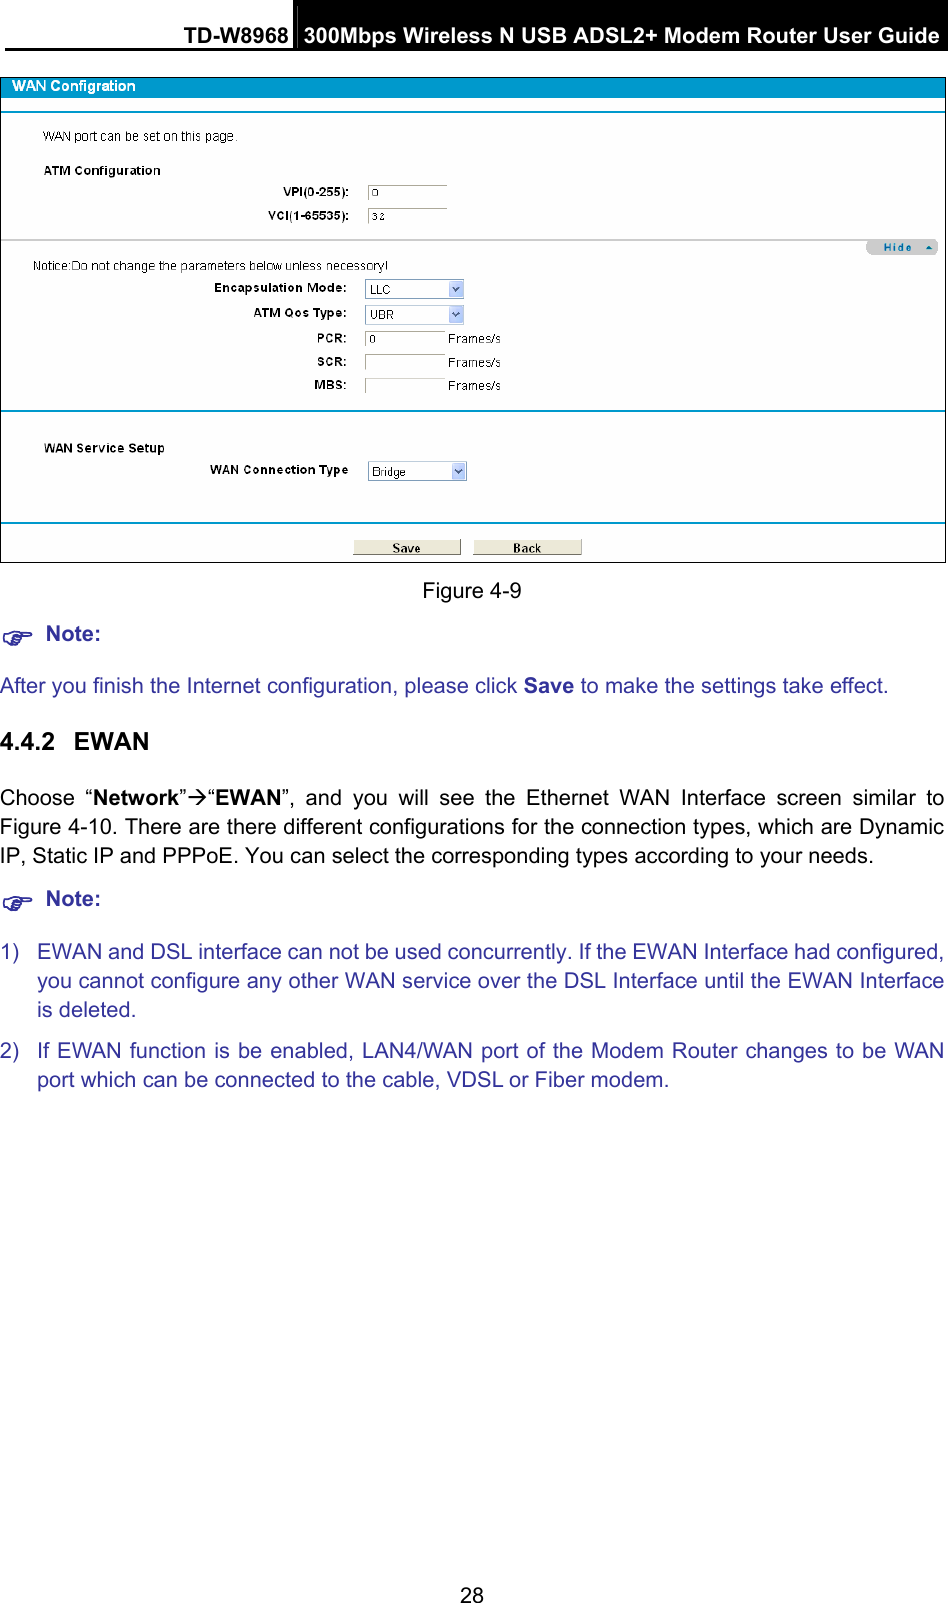 TD-W8968  300Mbps Wireless N USB ADSL2+ Modem Router User Guide 28  Figure 4-9 ) Note: After you finish the Internet configuration, please click Save to make the settings take effect. 4.4.2  EWAN Choose “Network”Æ“EWAN”, and you will see the Ethernet WAN Interface screen similar to Figure 4-10. There are there different configurations for the connection types, which are Dynamic IP, Static IP and PPPoE. You can select the corresponding types according to your needs. ) Note: 1)  EWAN and DSL interface can not be used concurrently. If the EWAN Interface had configured, you cannot configure any other WAN service over the DSL Interface until the EWAN Interface is deleted. 2)  If EWAN function is be enabled, LAN4/WAN port of the Modem Router changes to be WAN port which can be connected to the cable, VDSL or Fiber modem.    